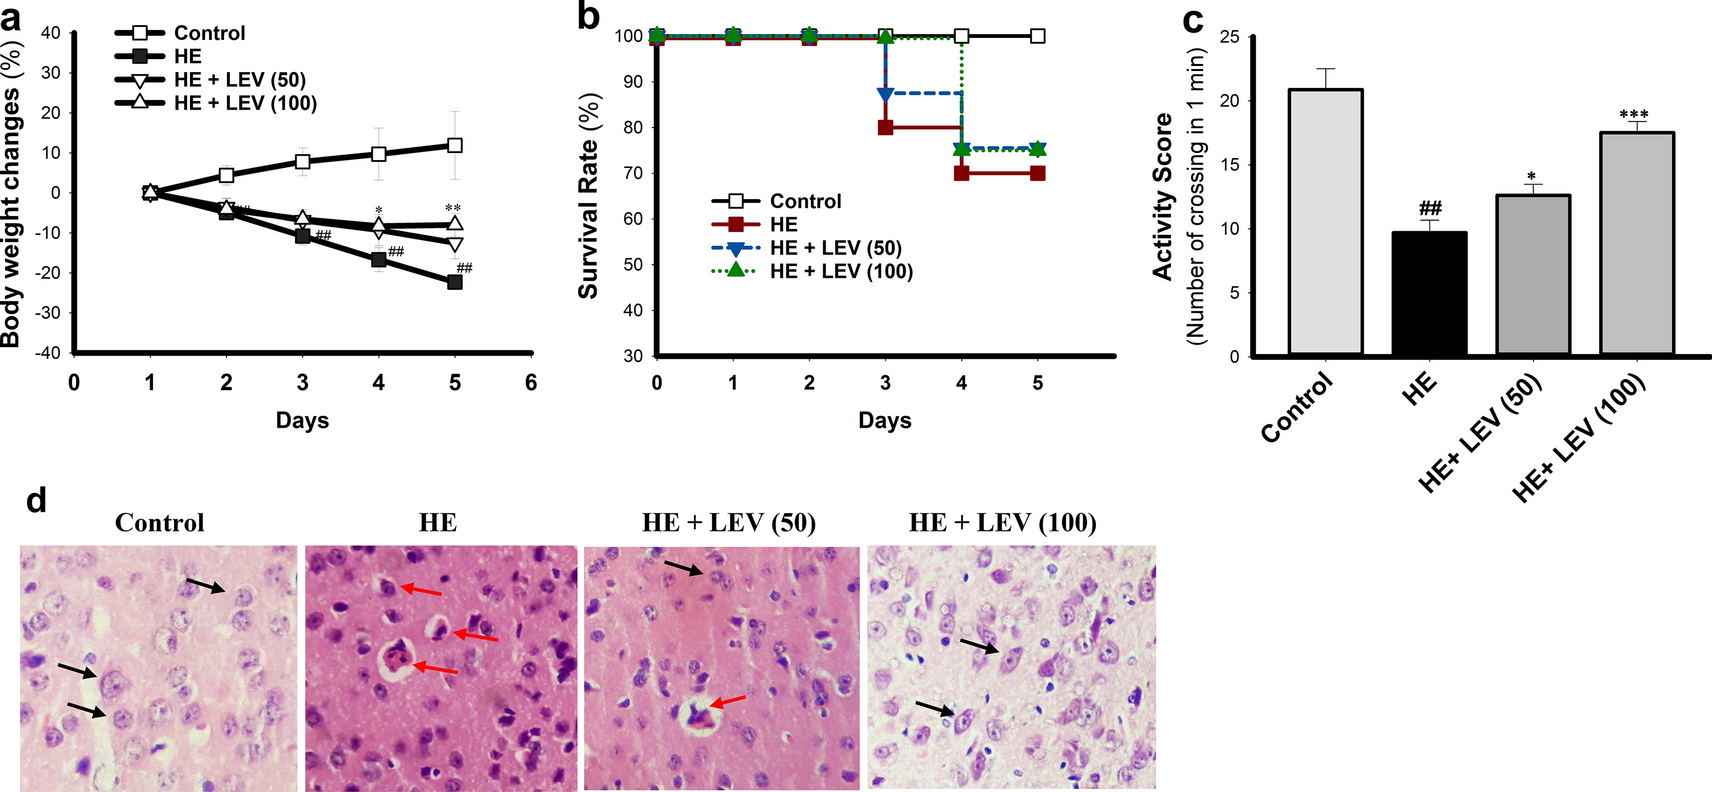 Therapeutic Effect of Levetiracetam Against Thioacetamide-Induced Hepatic Encephalopathy Through Inhibition of Oxidative Stress and Downregulation of NF-κB, NLRP3, iNOS/NO, Pro-Inflammatory Cytokines and Apoptosis